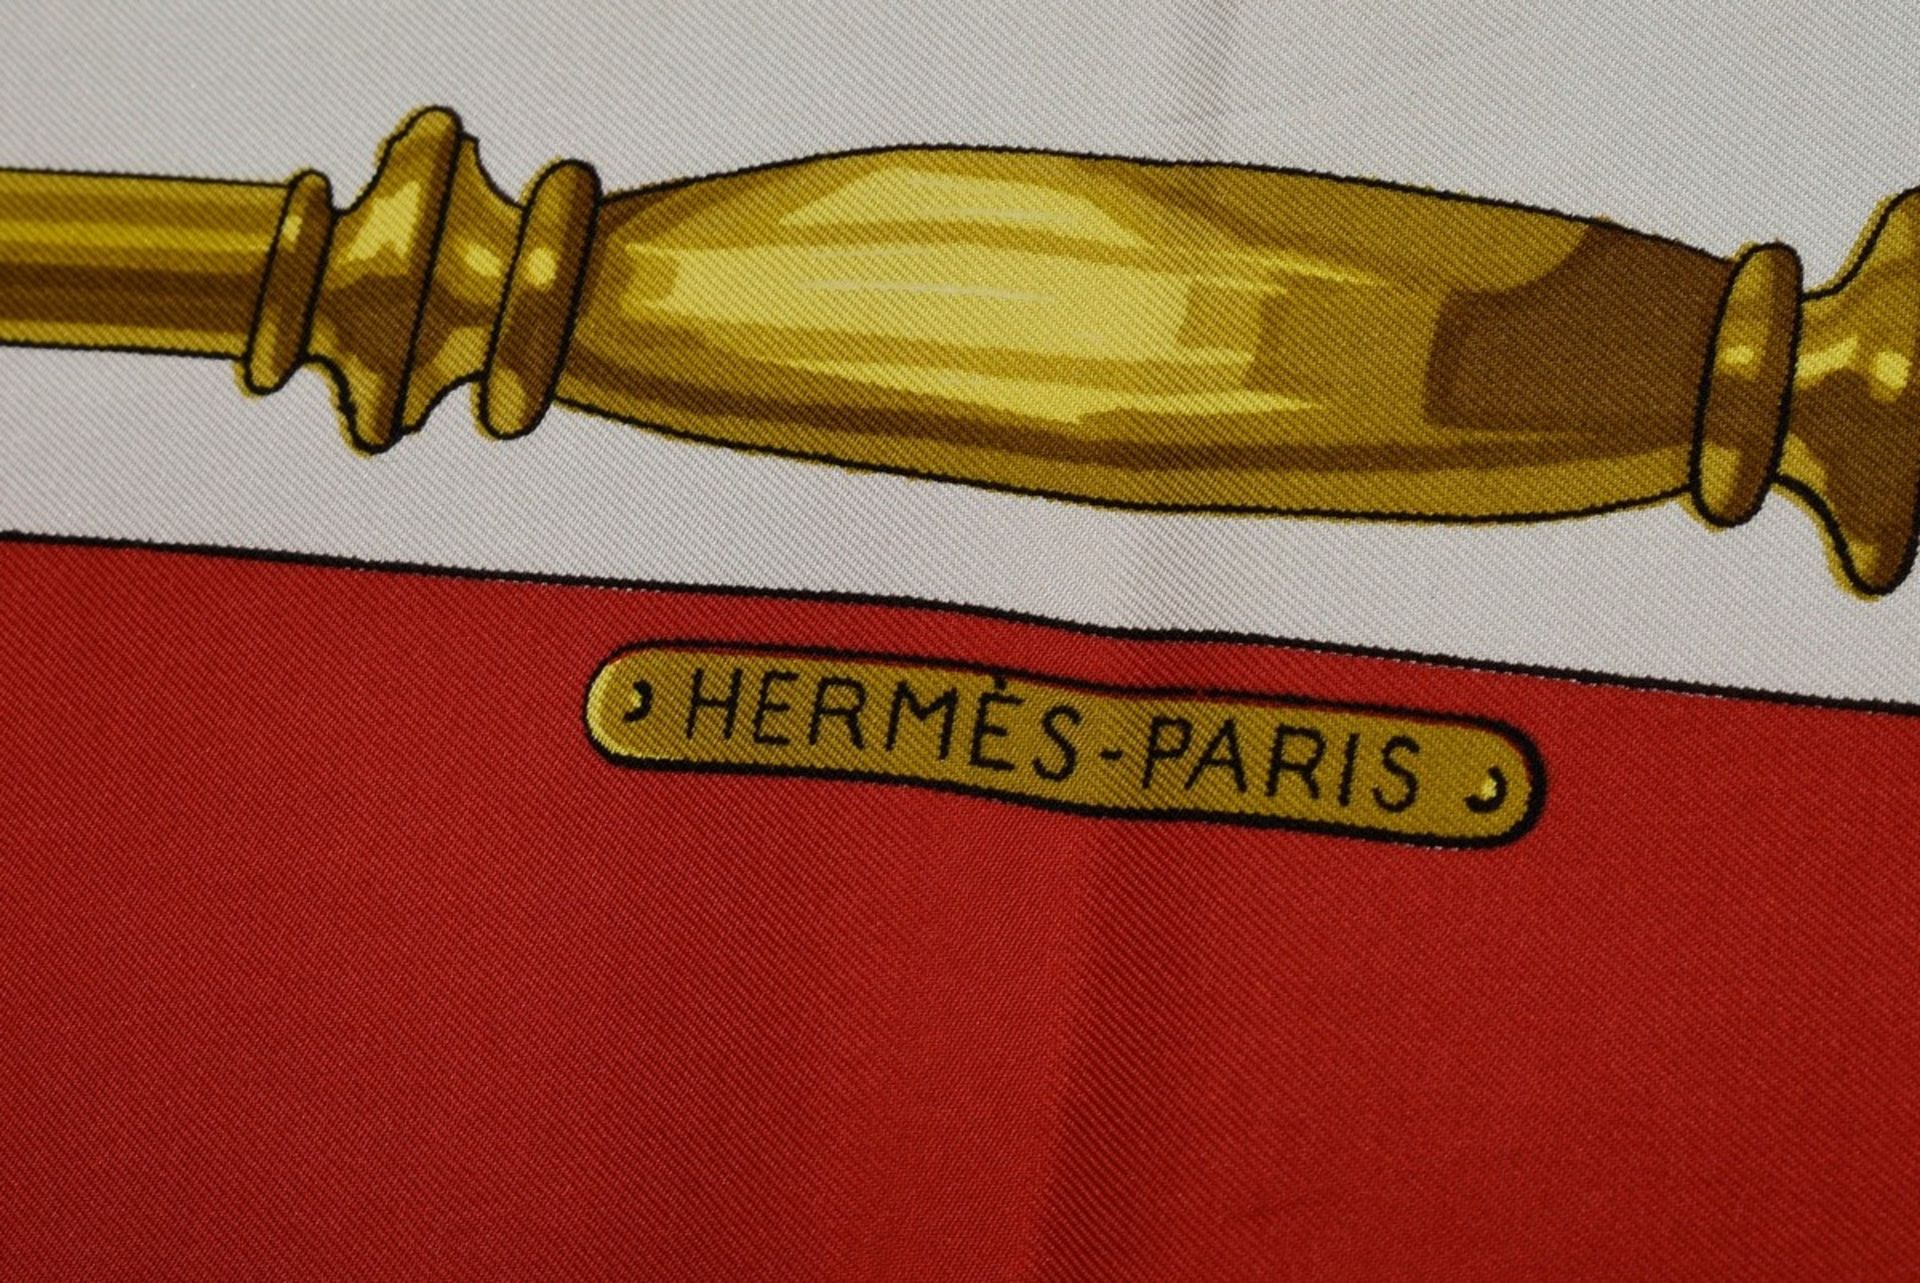 Hermès silk carré "Harnais des Presidents" in red, design: Francoise Heron 1966, rolled edge, 90x90 - Image 3 of 4